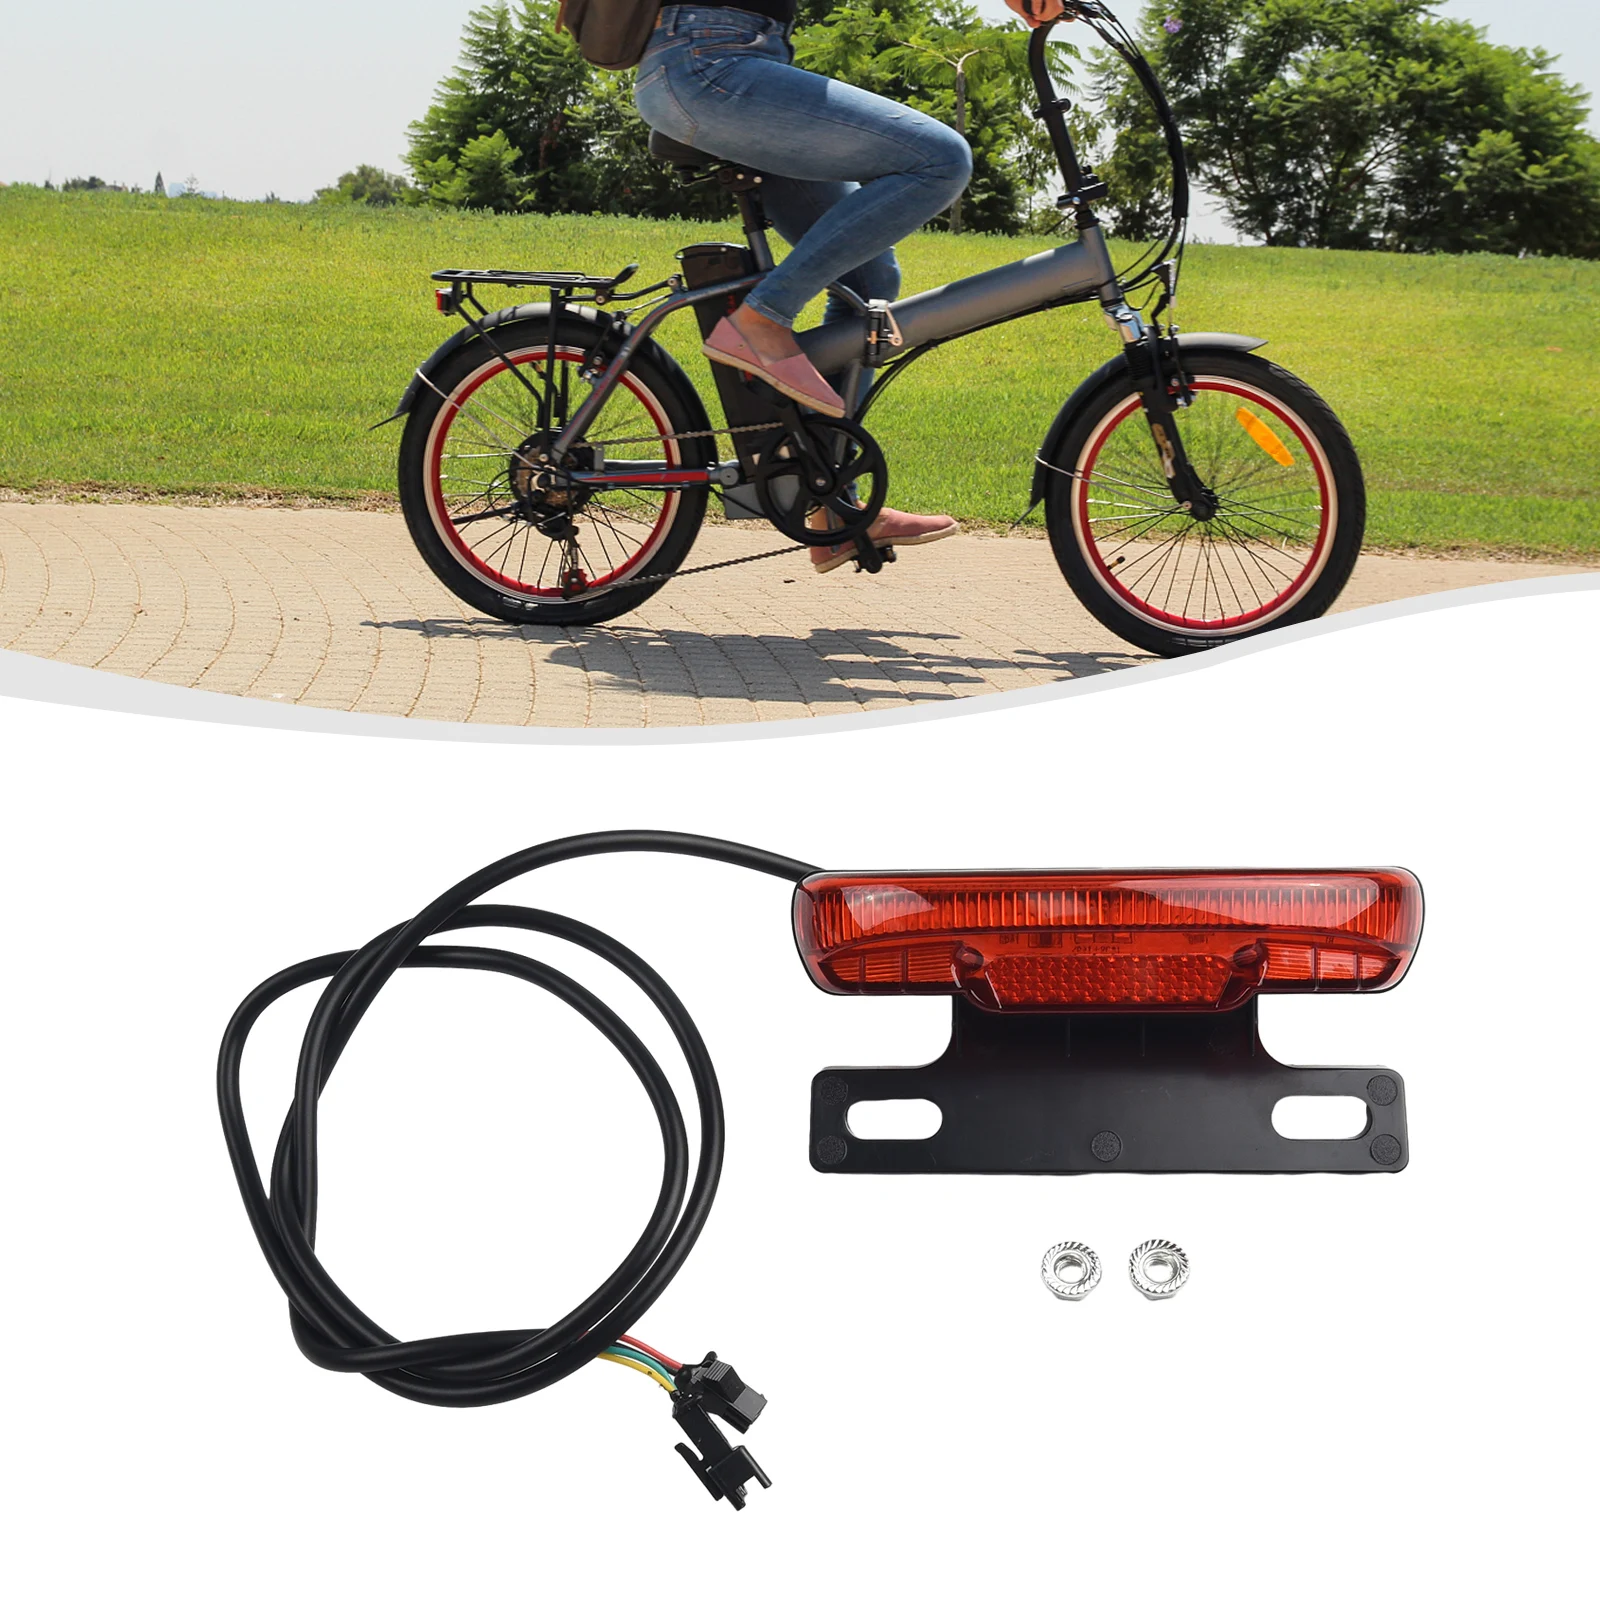 

1pc Bike ABS Tail Light 36-48V Ebike Rear LightTail Light Safety Warn Rear Lamp For Electric Bicycle Accessories Parts